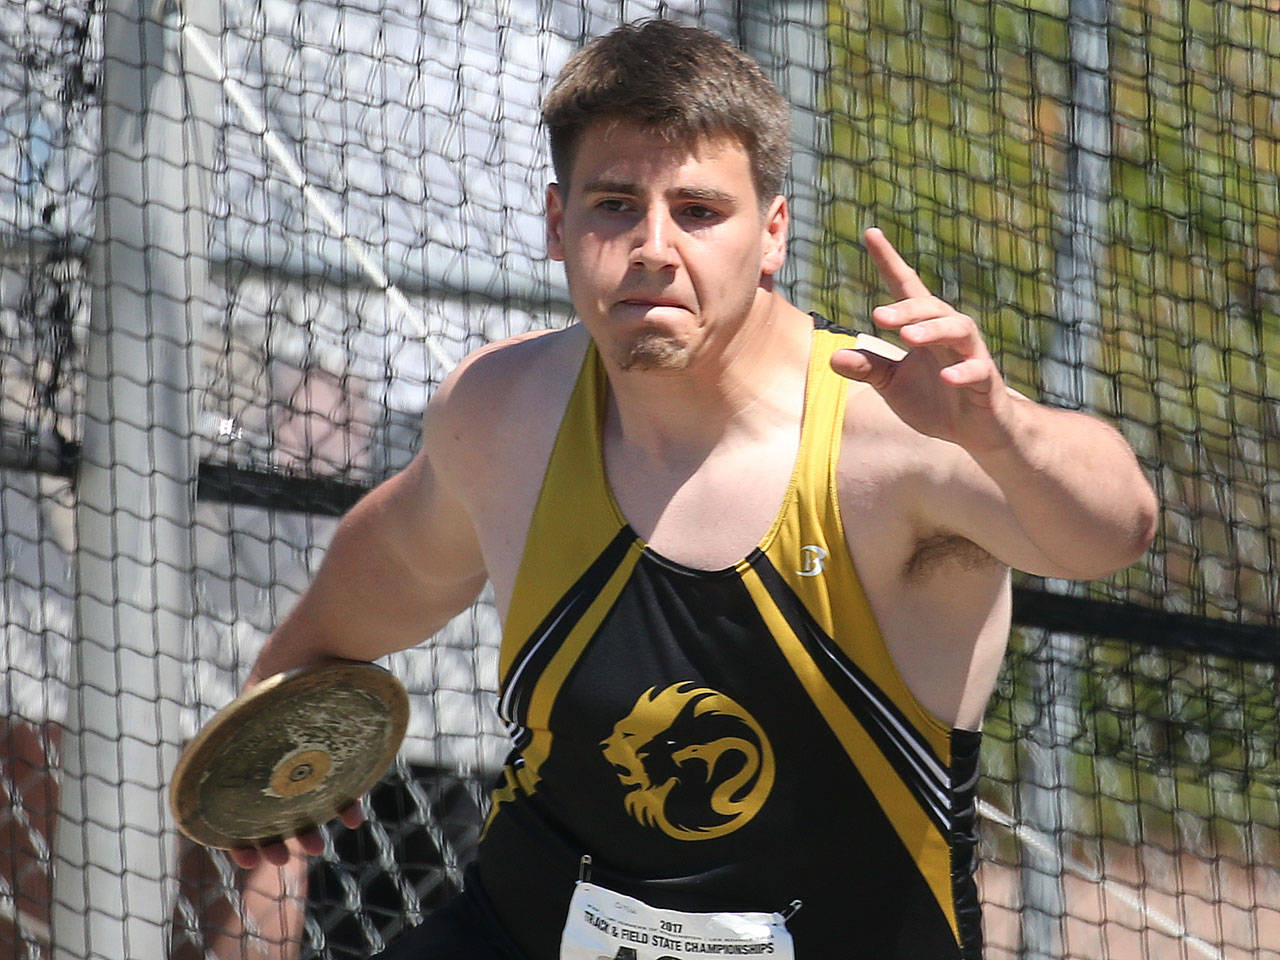 Lynnwood’s Harris Cutuk winds up to throw the discus during the 3A state track and field championships on May 27, 2017, at Mount Tahoma High School in Tacoma. Cutuk won the event with a throw of 171 feet, 5 inches . (Kevin Clark / The Herald)